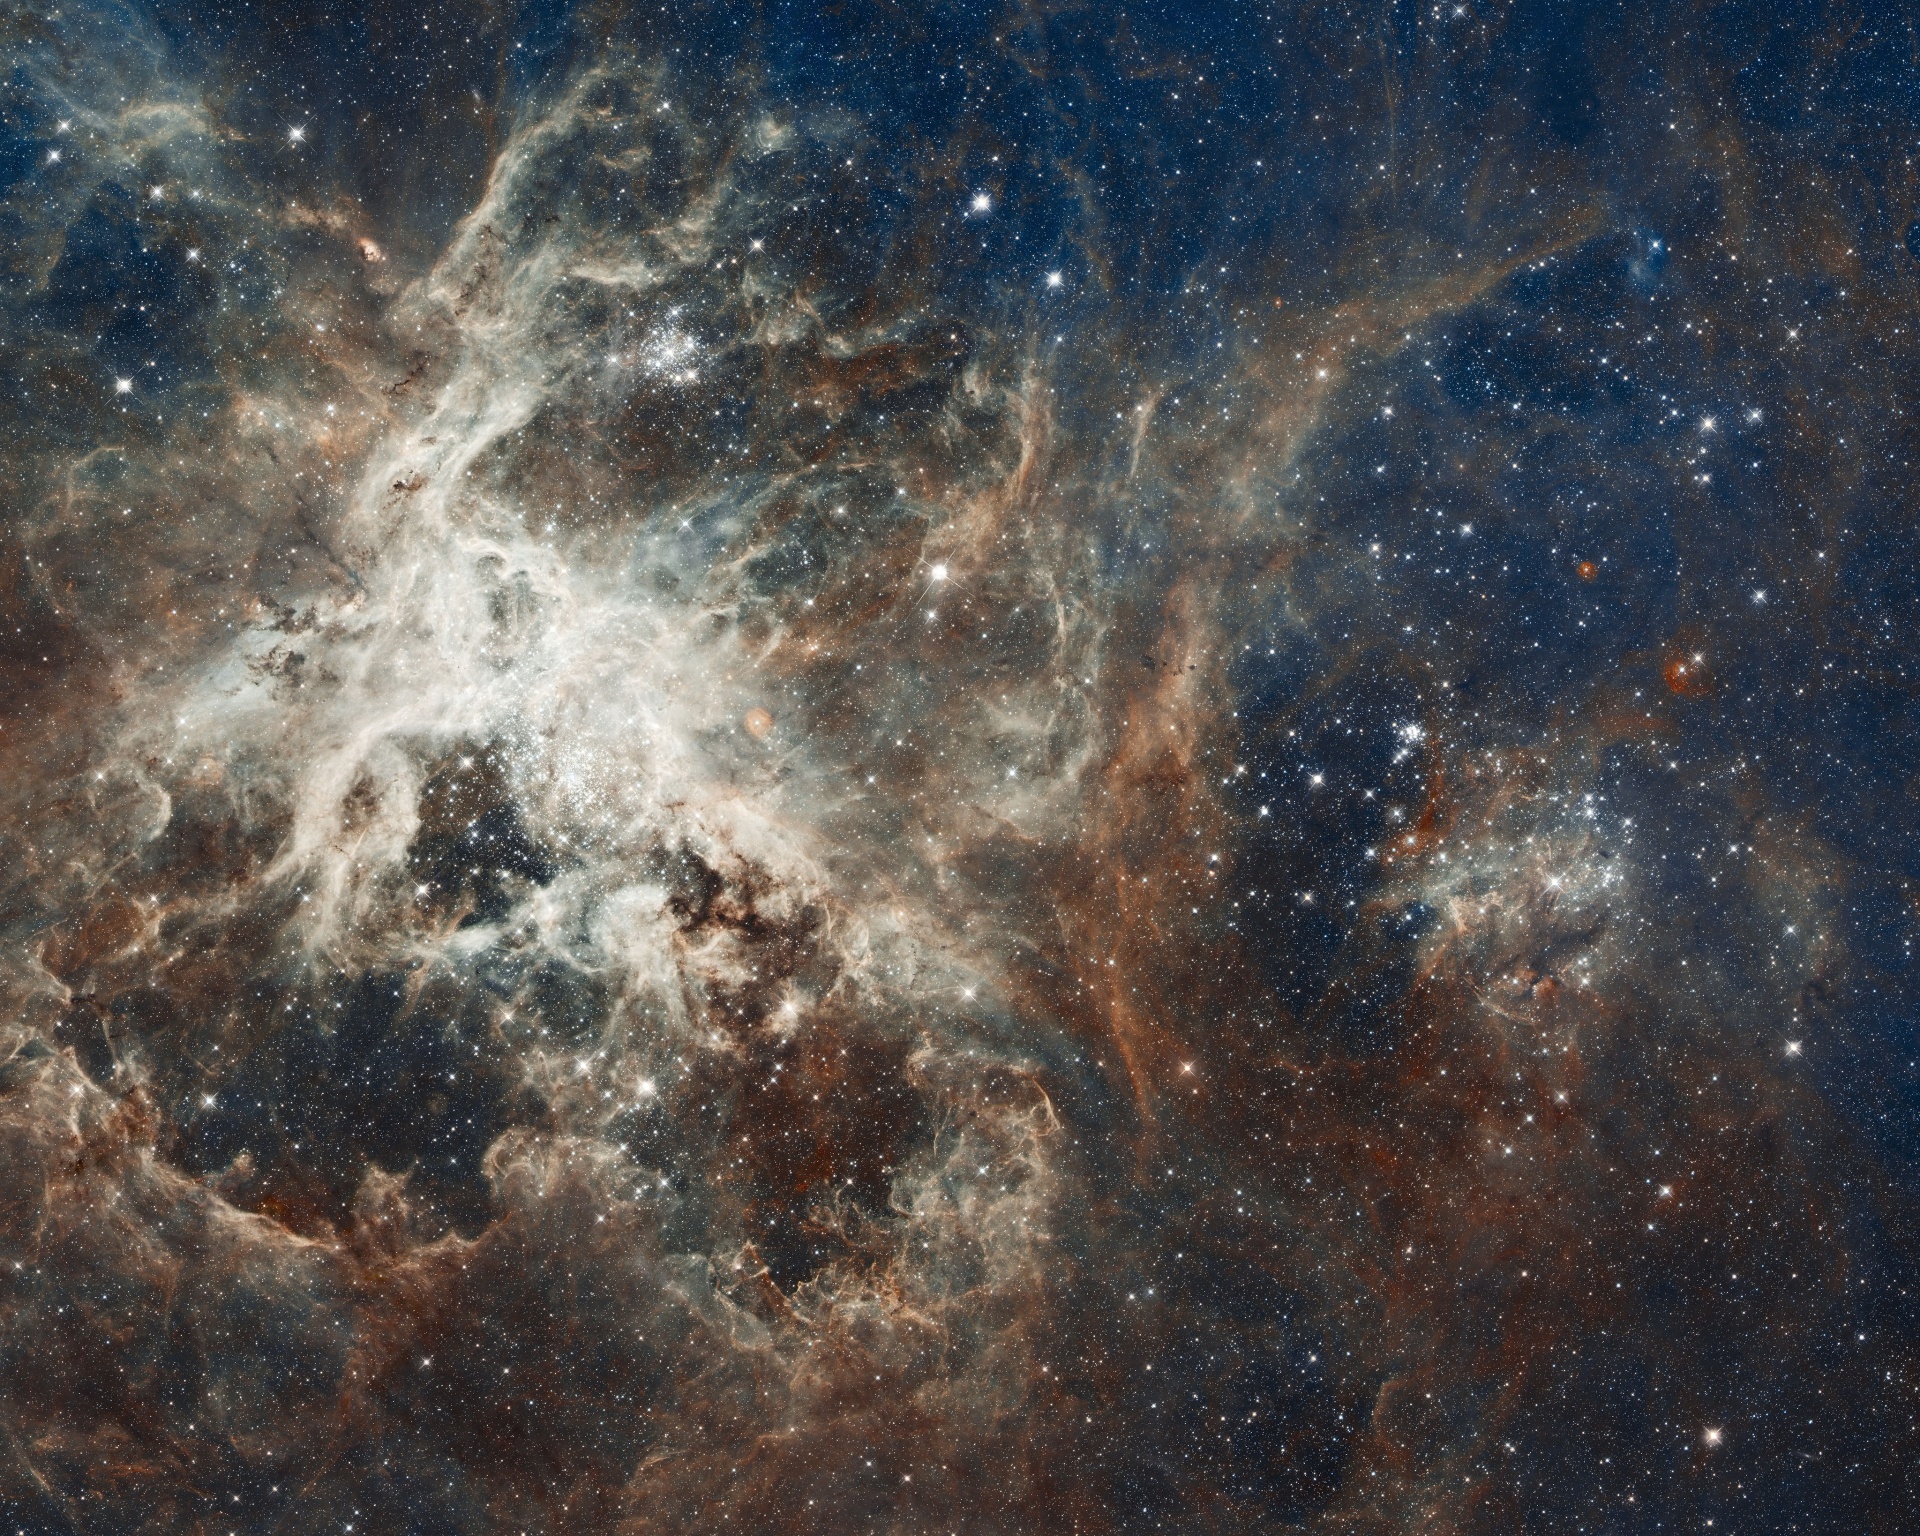 A photo of 30 Doradus, which is the brightest star-forming region visible in a neighboring galaxy and home to the most massive stars ever seen. Slightly left of center is a woman in white, with four arms, lying down, flinging a star into space.